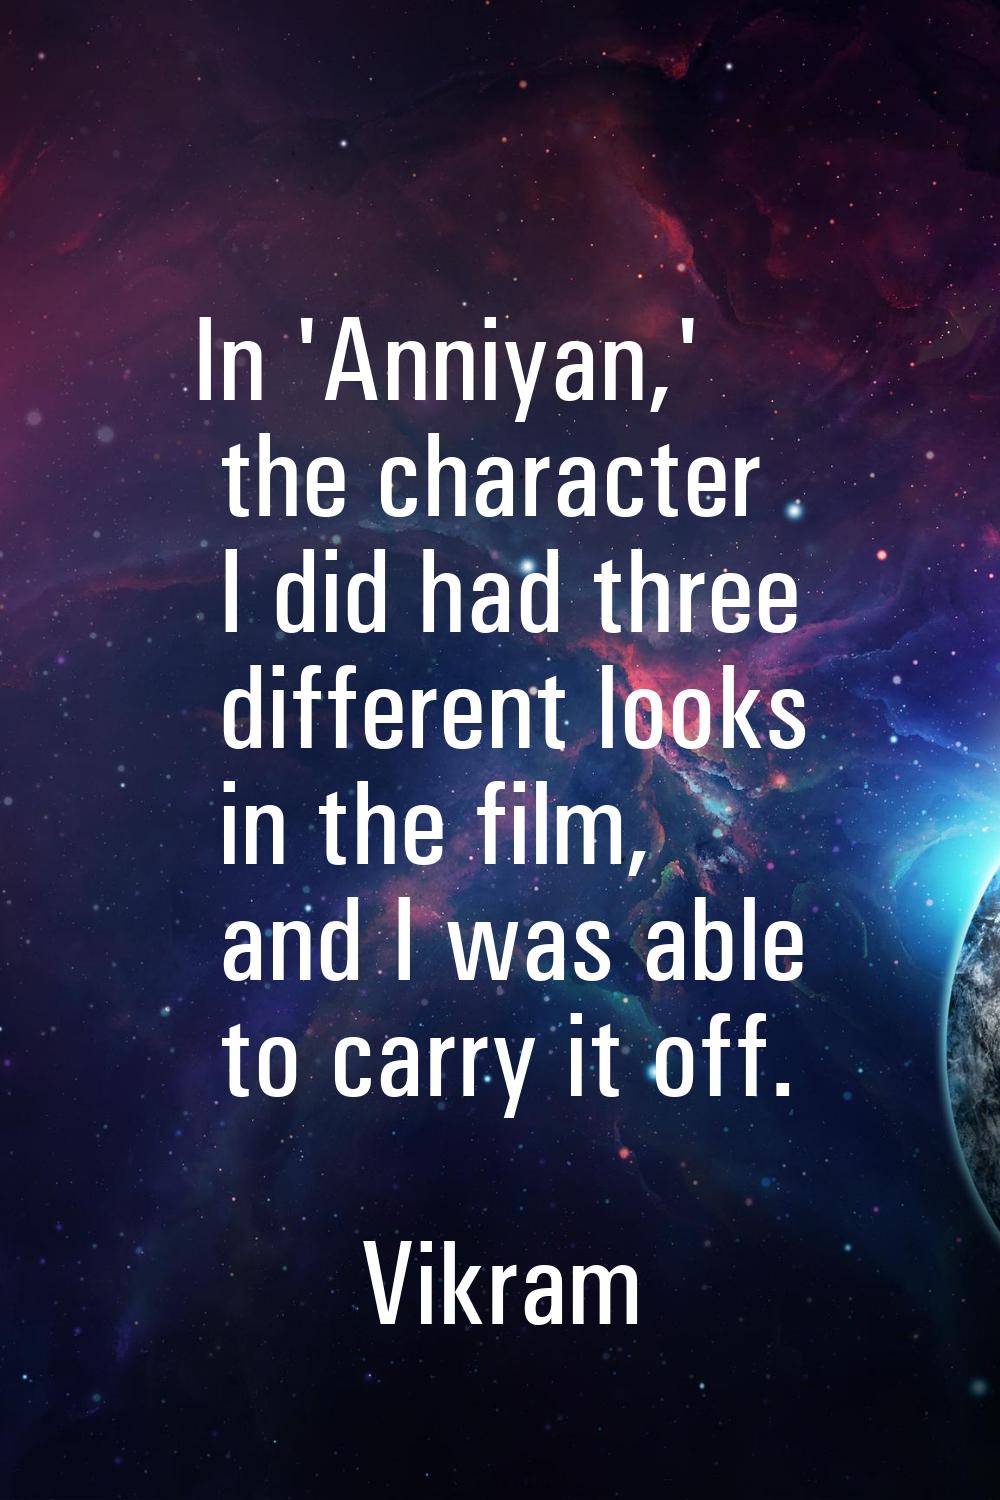 In 'Anniyan,' the character I did had three different looks in the film, and I was able to carry it